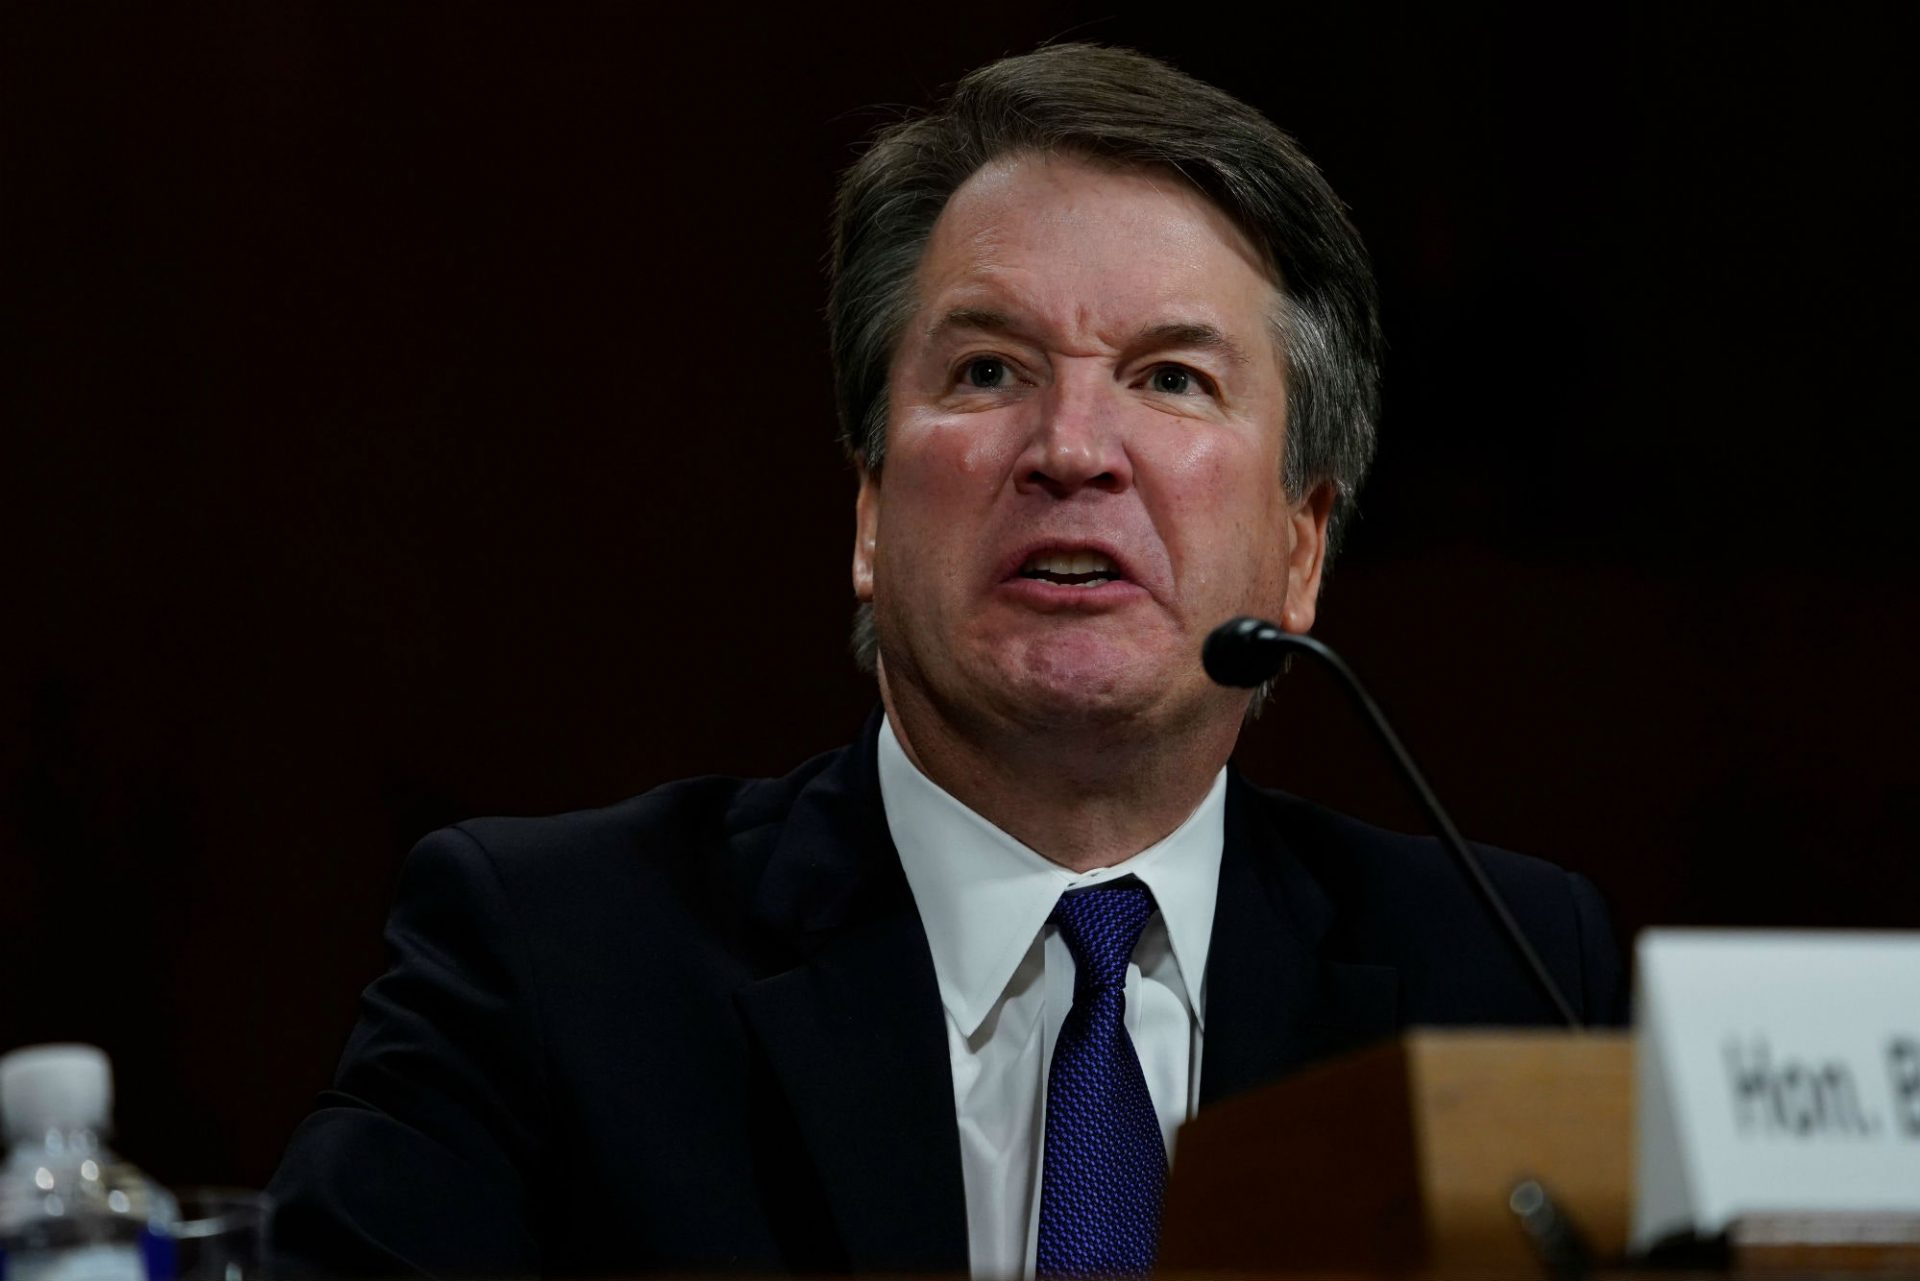 Brett Kavanaugh Solutions Young folks Deserve Life in Prison With No Chance of Parole